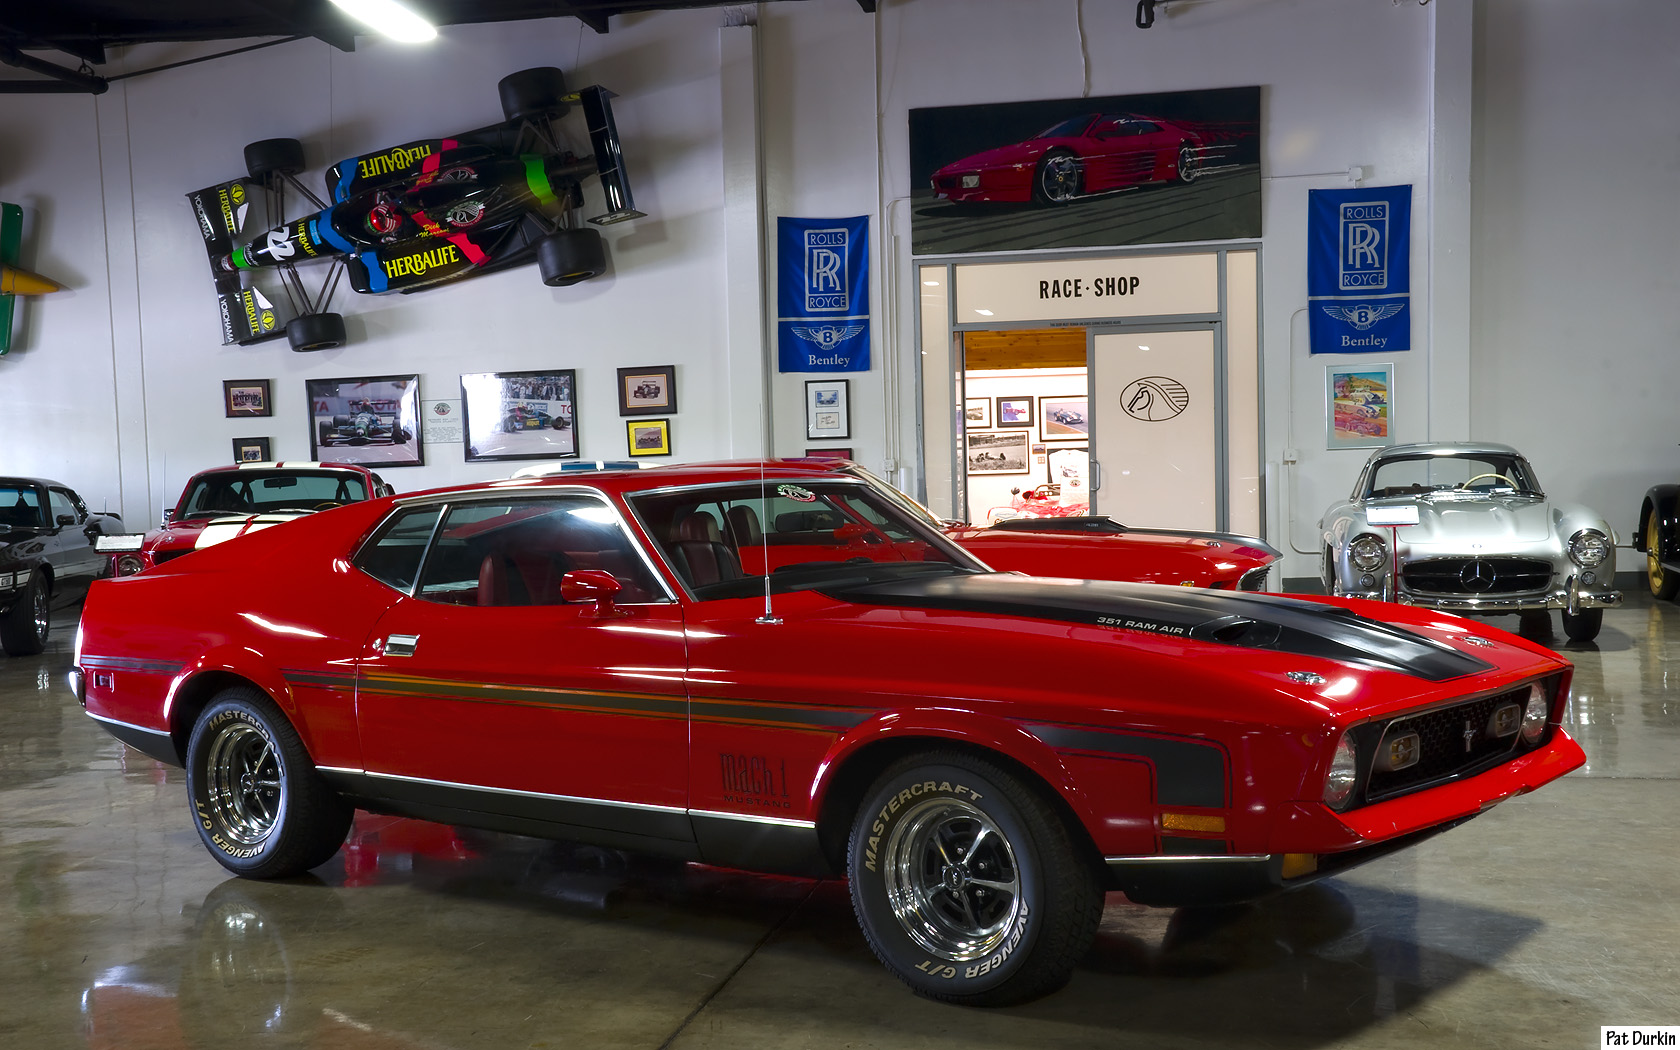 Ford Muscle Car Classic Car Ford Mustang Mach 1 Red Car 1680x1050